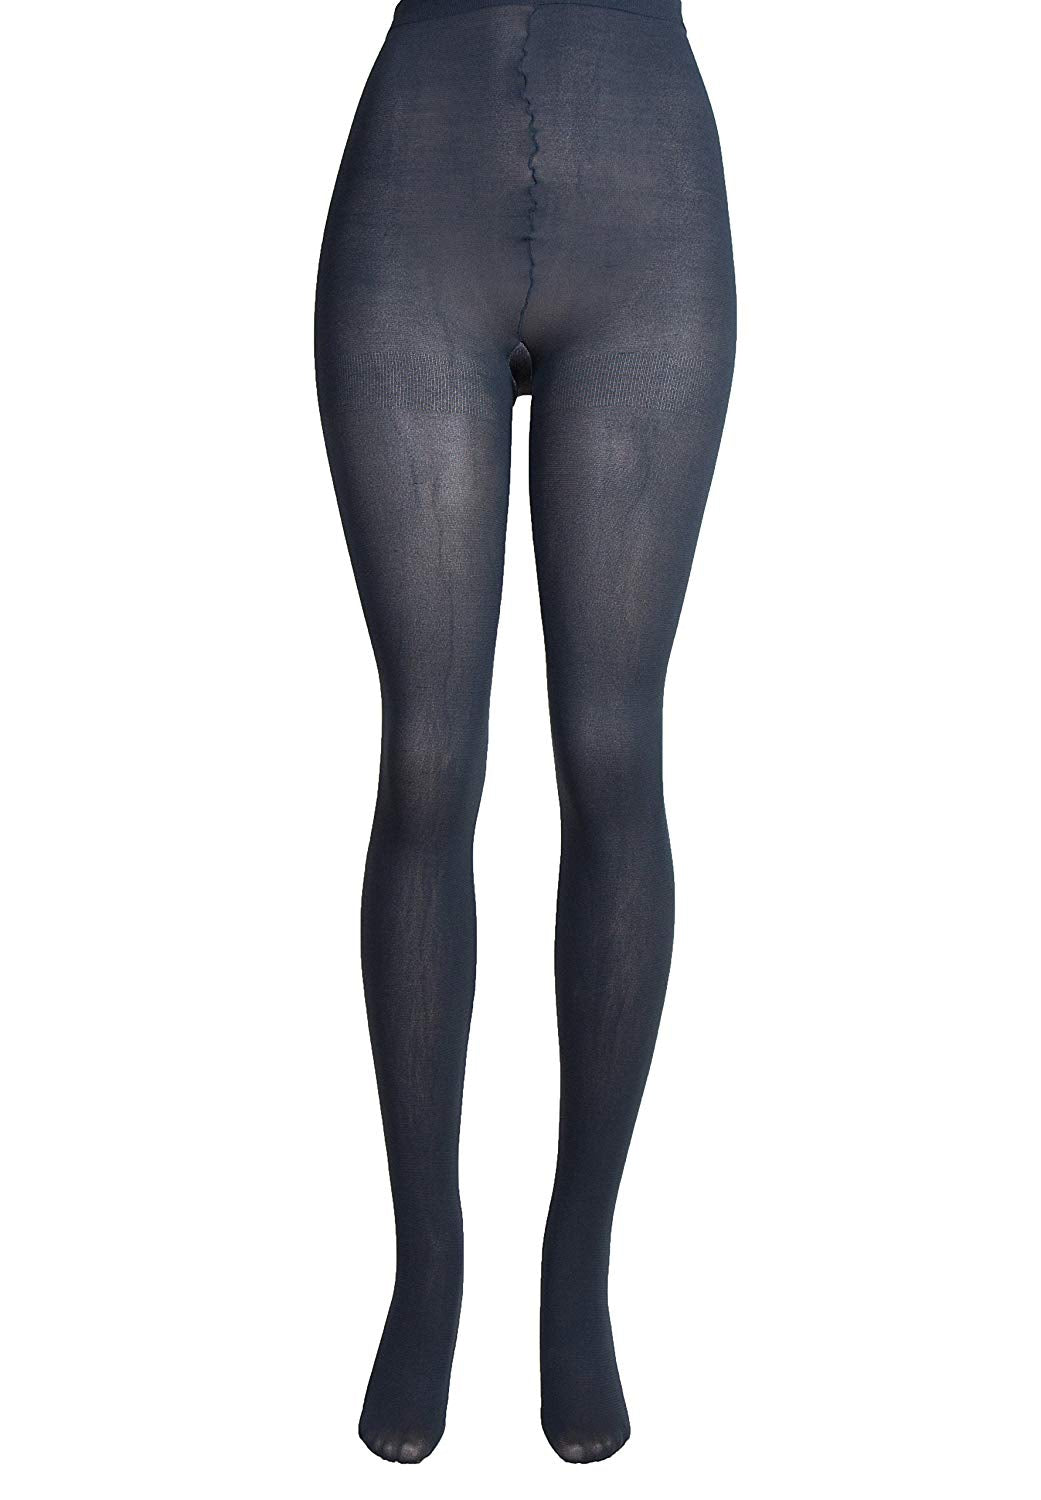 Lissele Opaque Plus-Size Tights